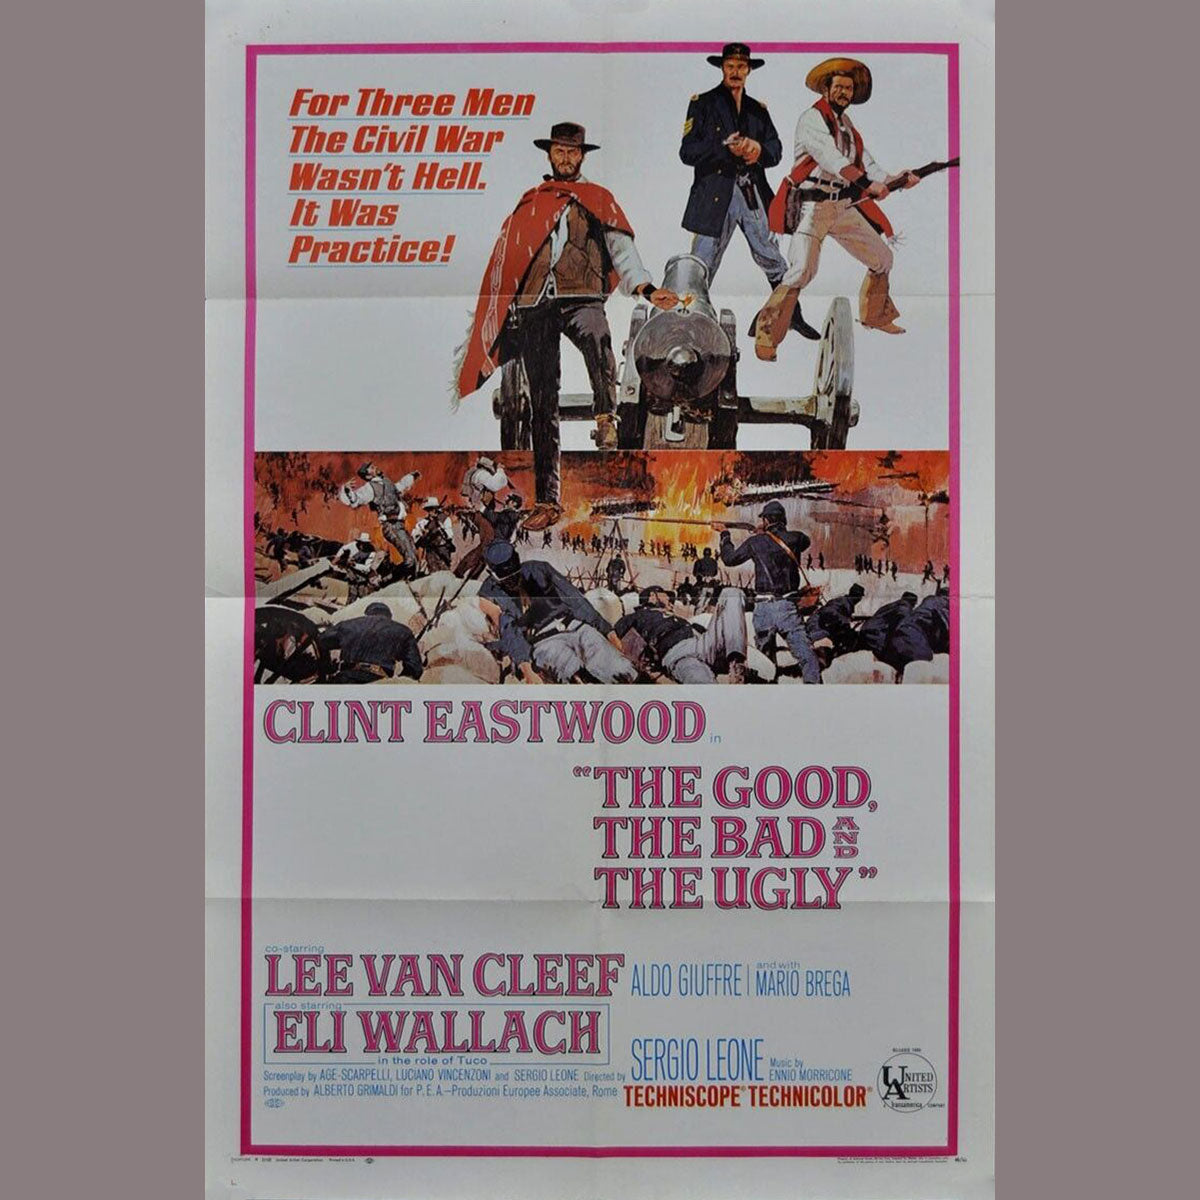 Good, The Bad And The Ugly, The (1966)